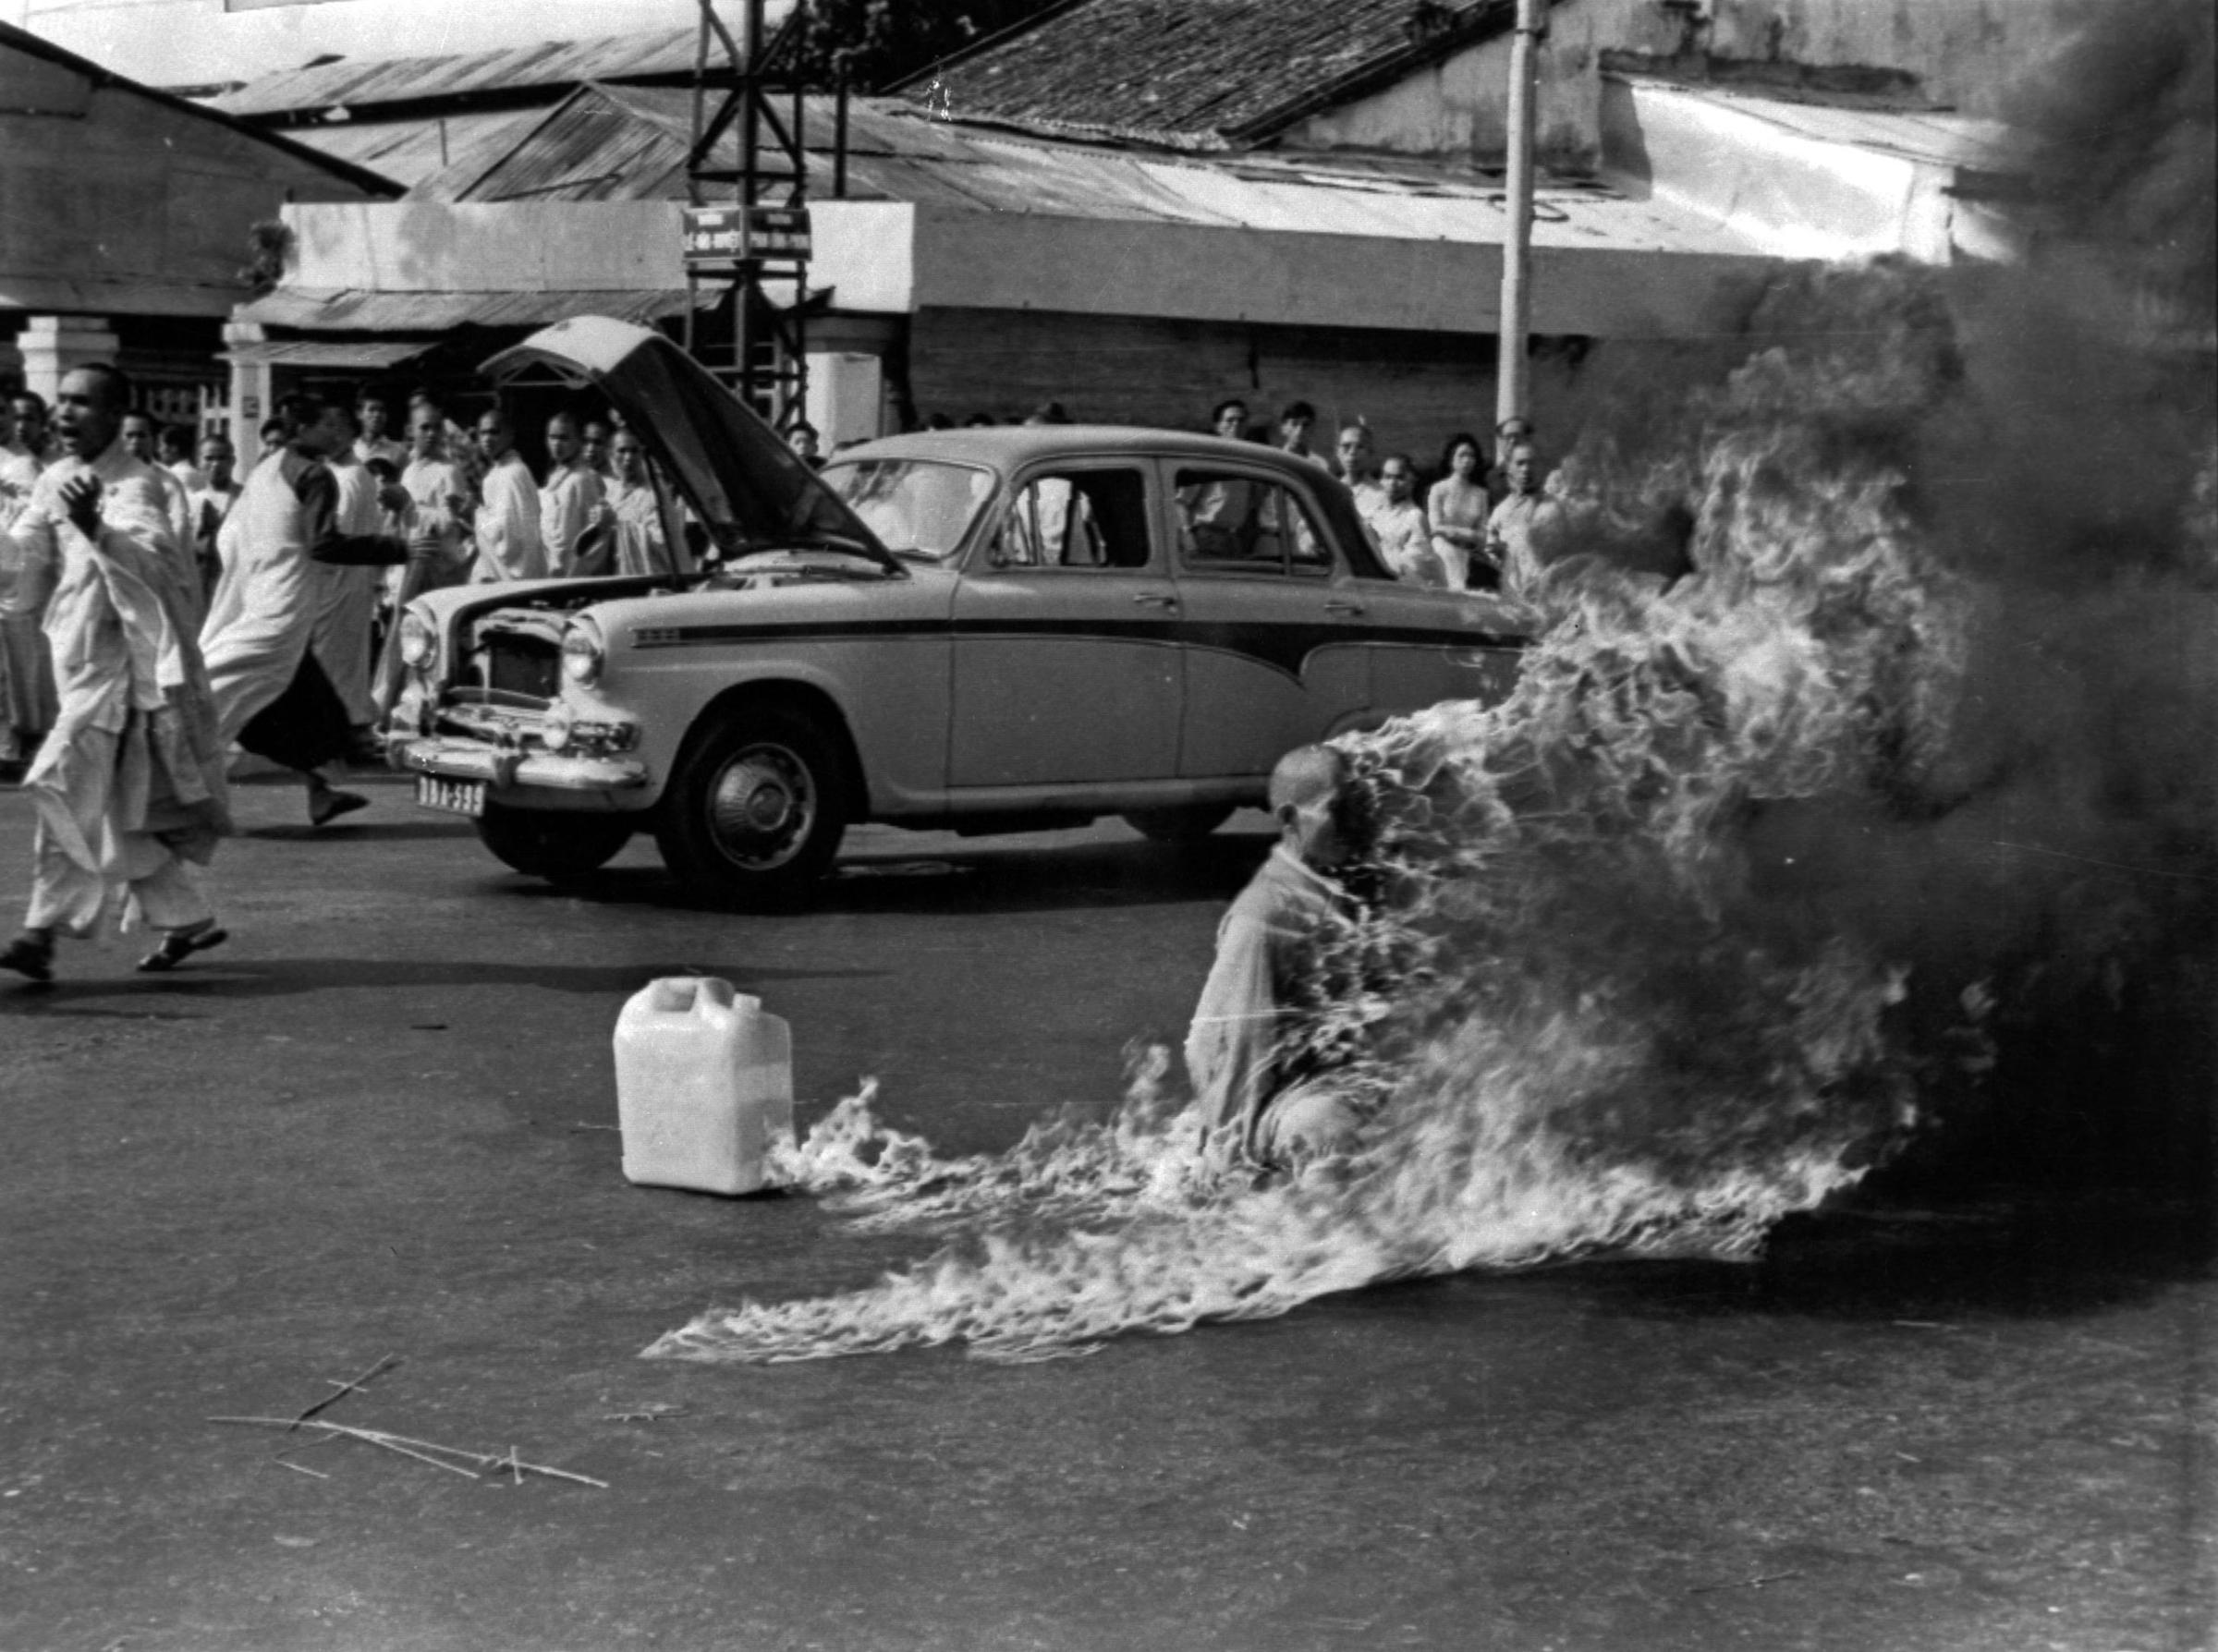 The Reverend Thich Quang Duc, a 73-year-old Buddhist monk, is soaked in petrol before setting fire to himself and burning to death in front of thousands of onlookers at a main highway intersection in Saigon on June 11, 1963.